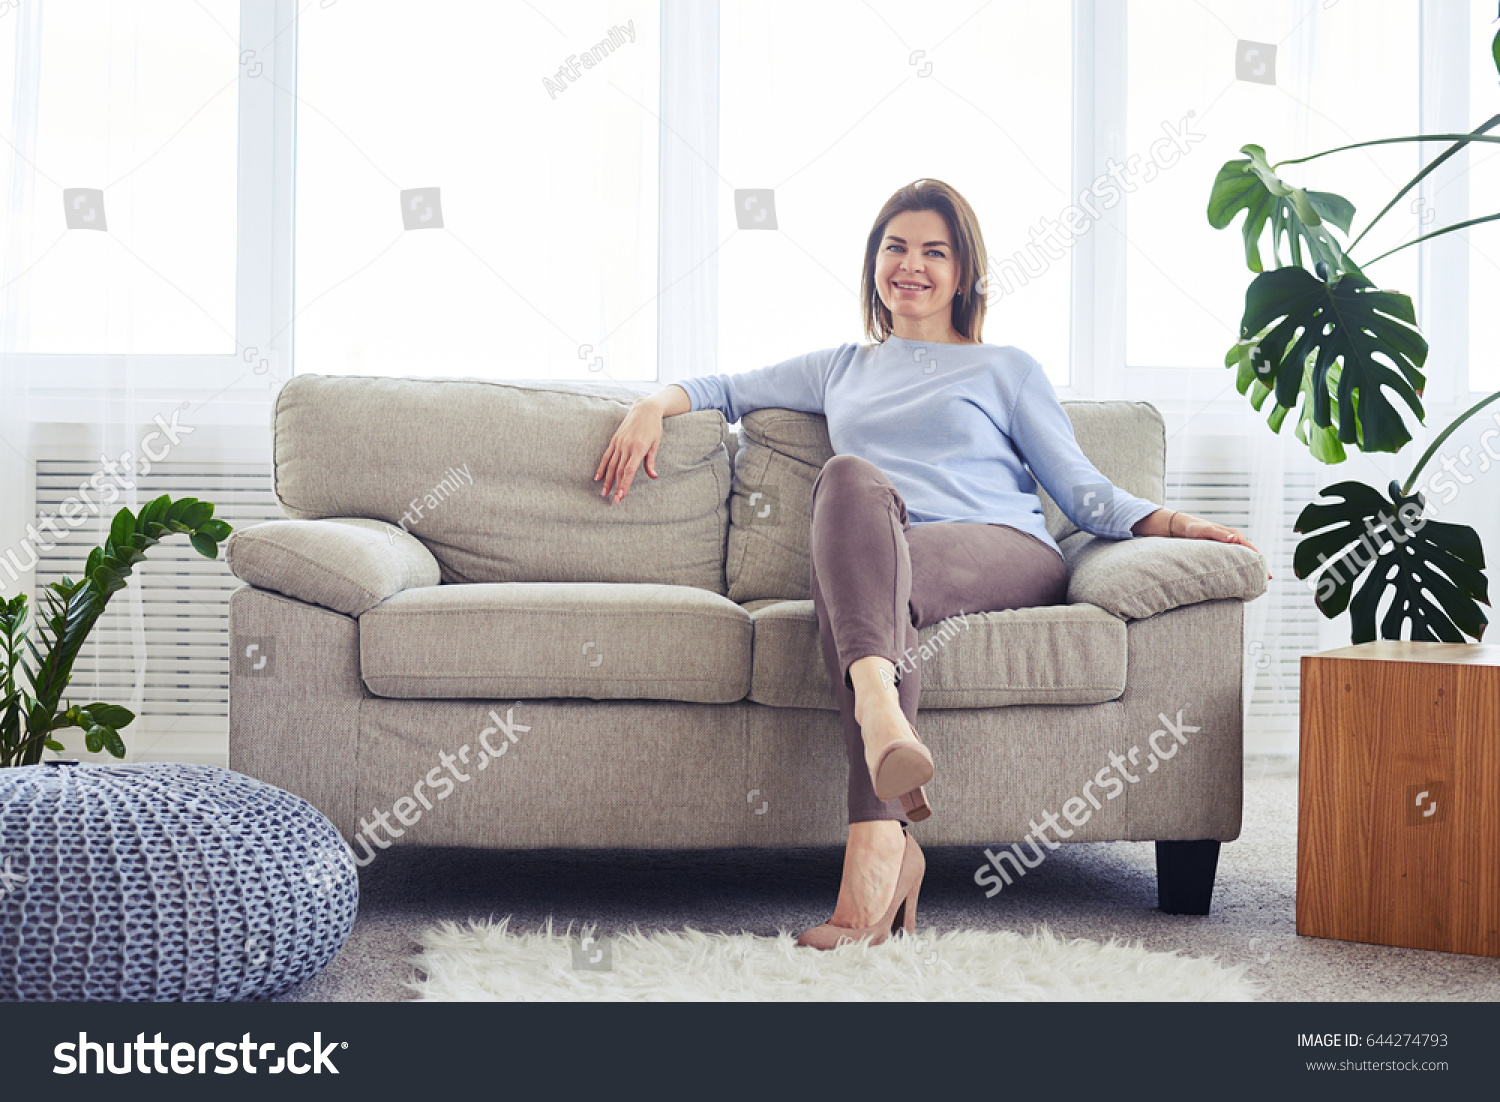 Wide shot of woman in fashionable clothes sitting on sofa in bright living room #644274793